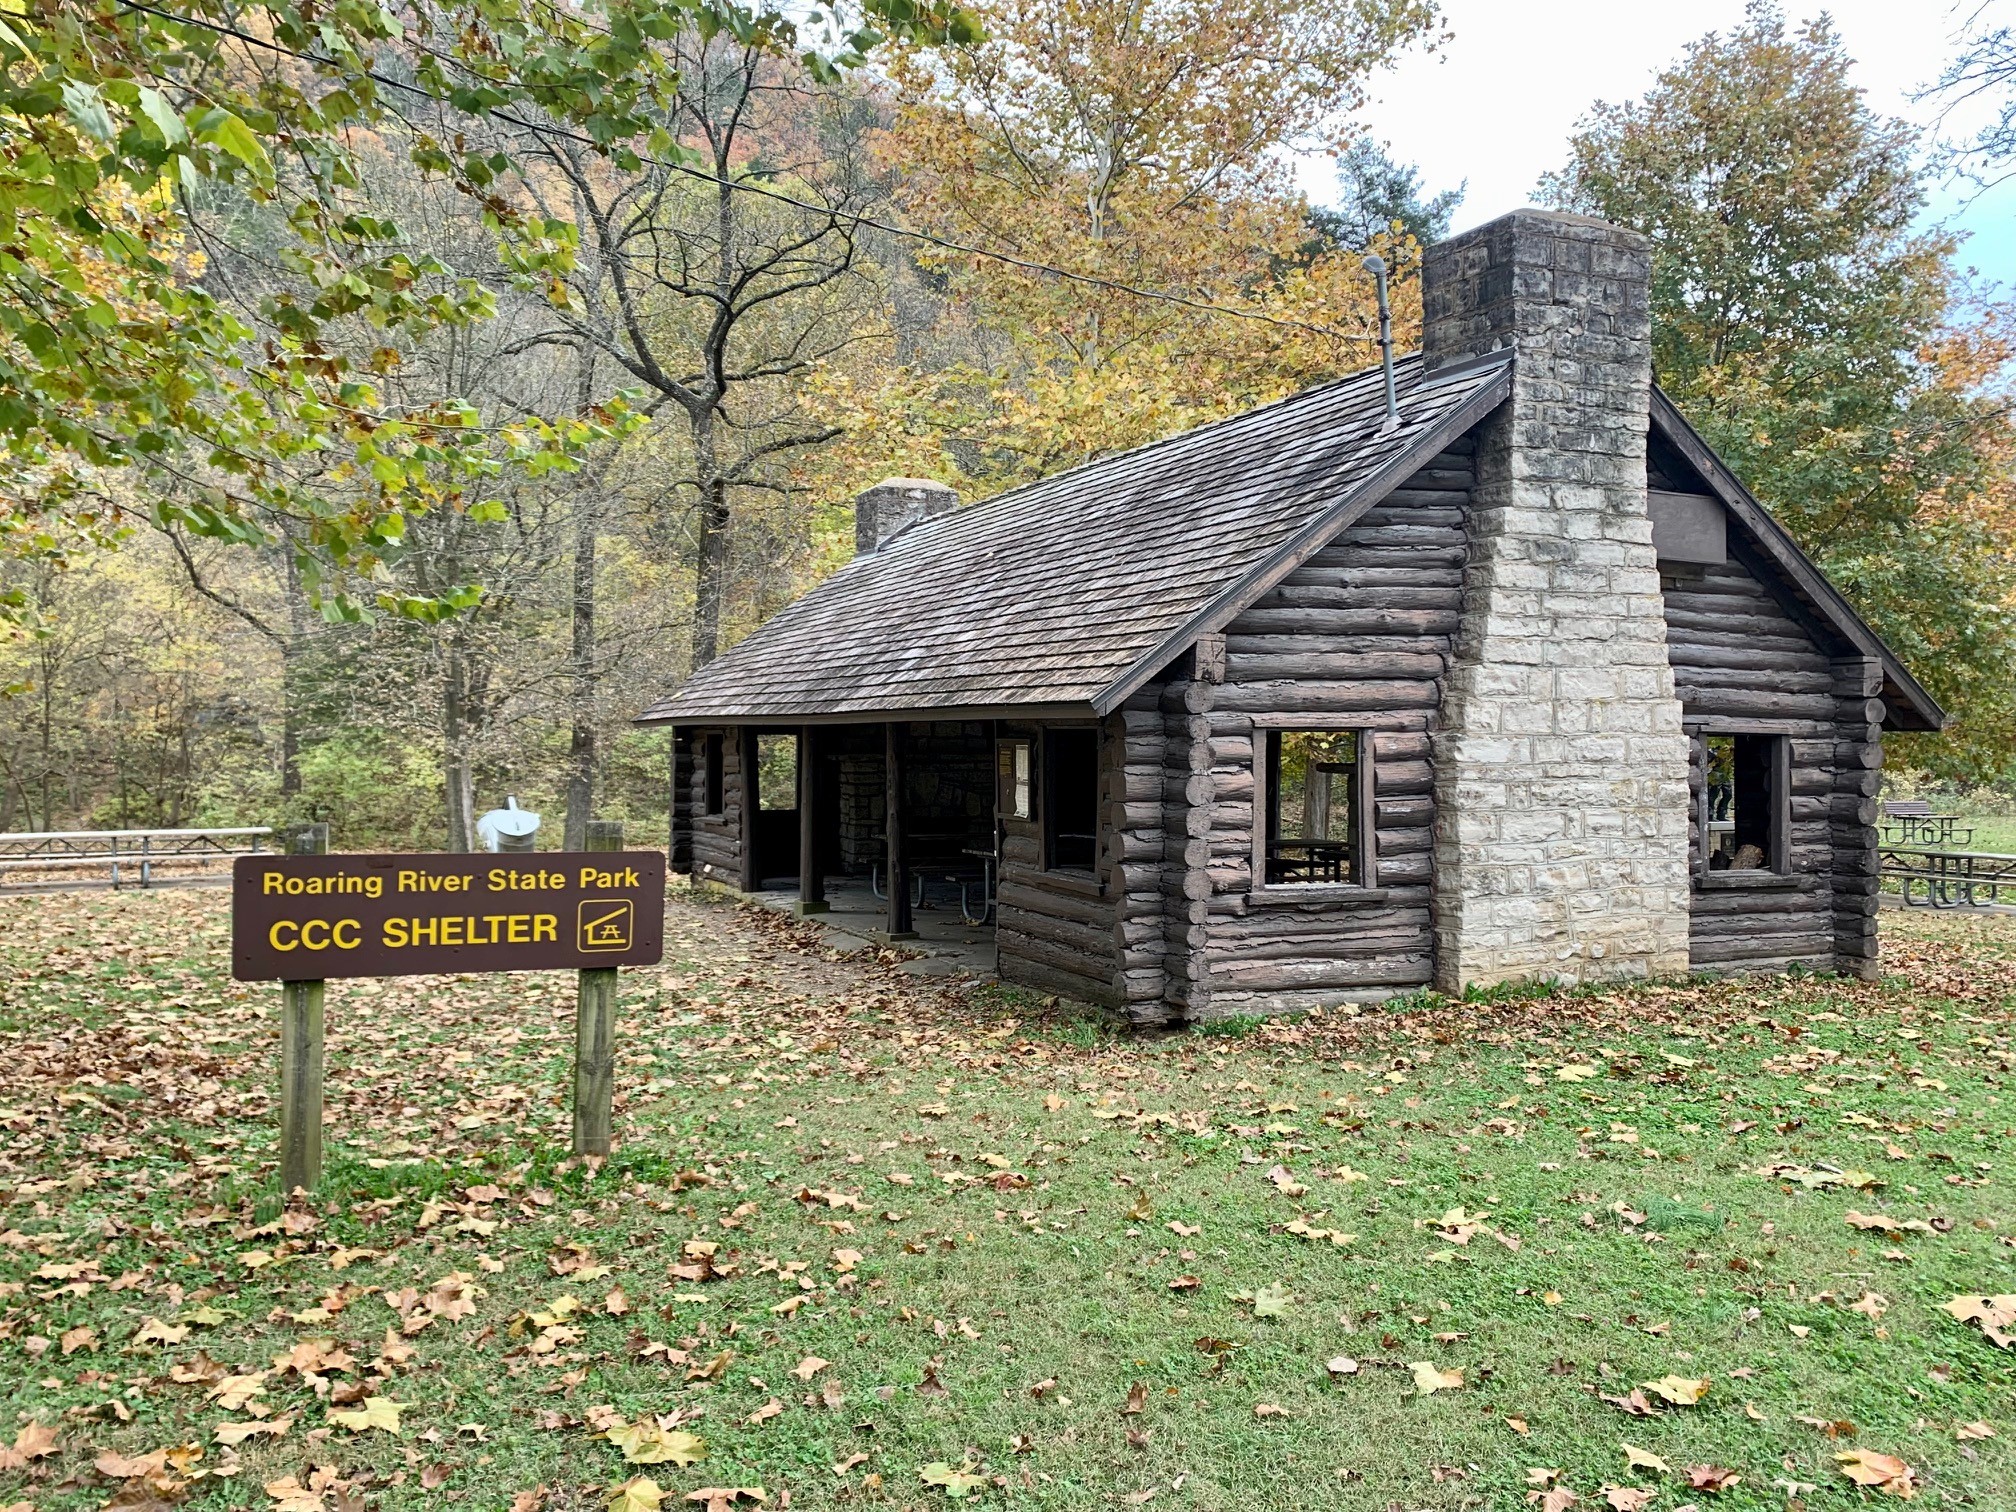 Exterior of wood and brick picnic shelter